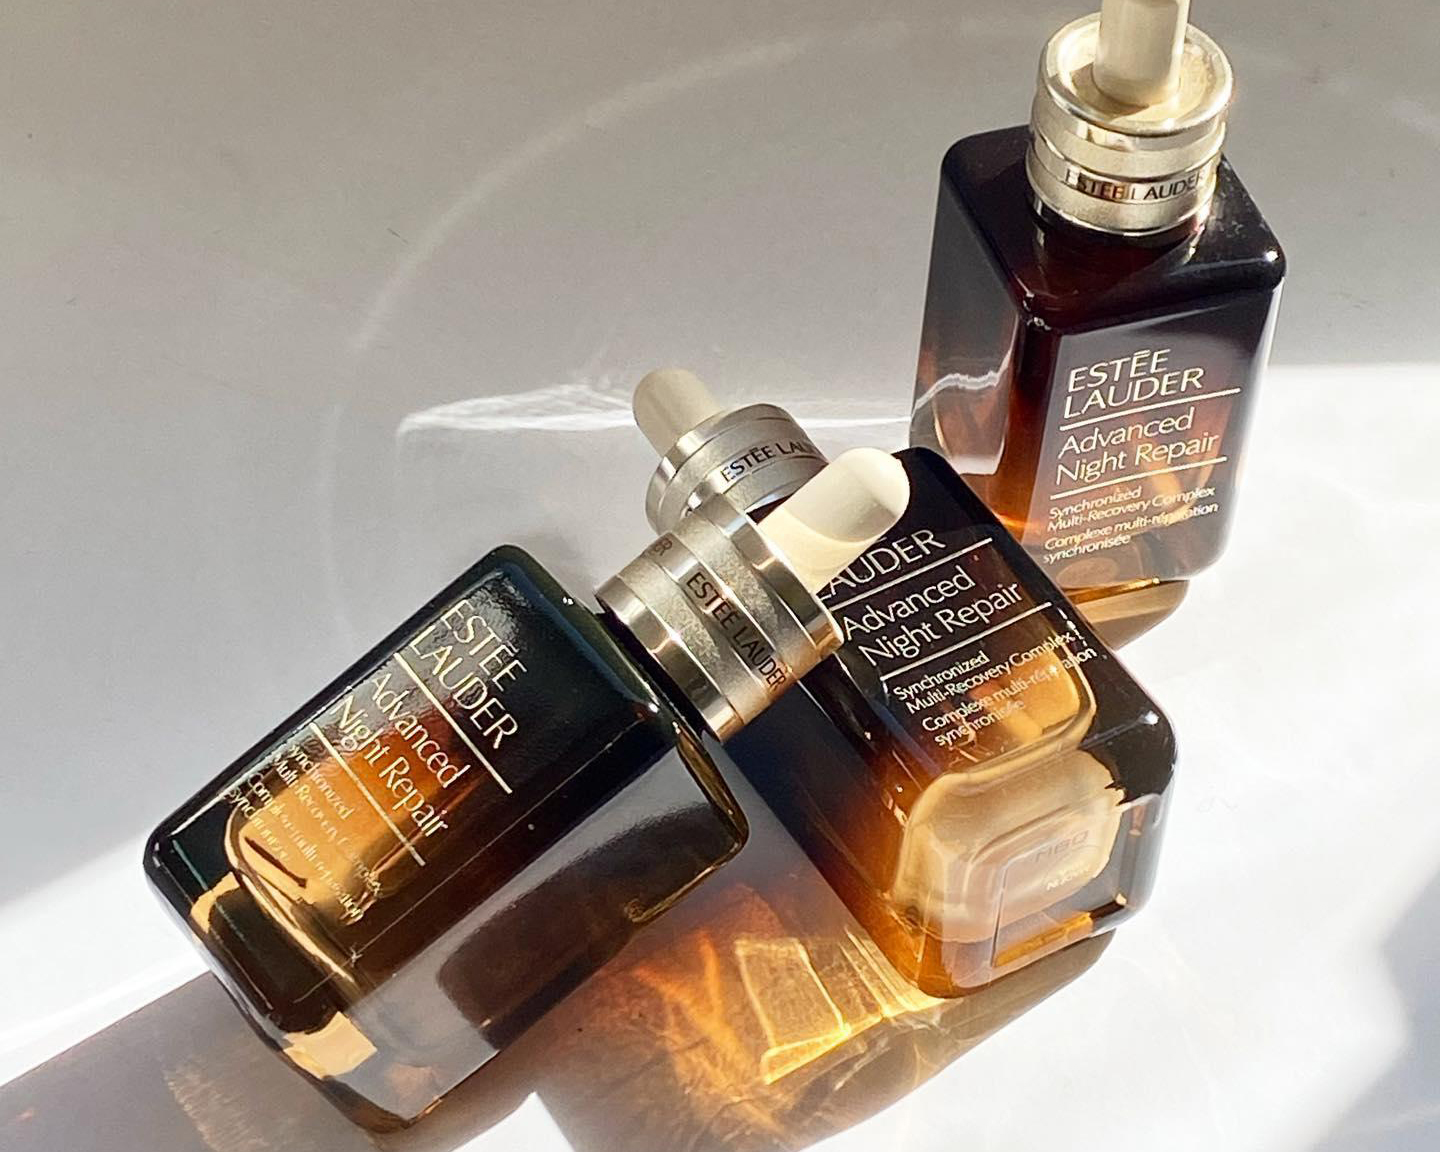 Estée Lauder advanced night repair bottles are stacked together.